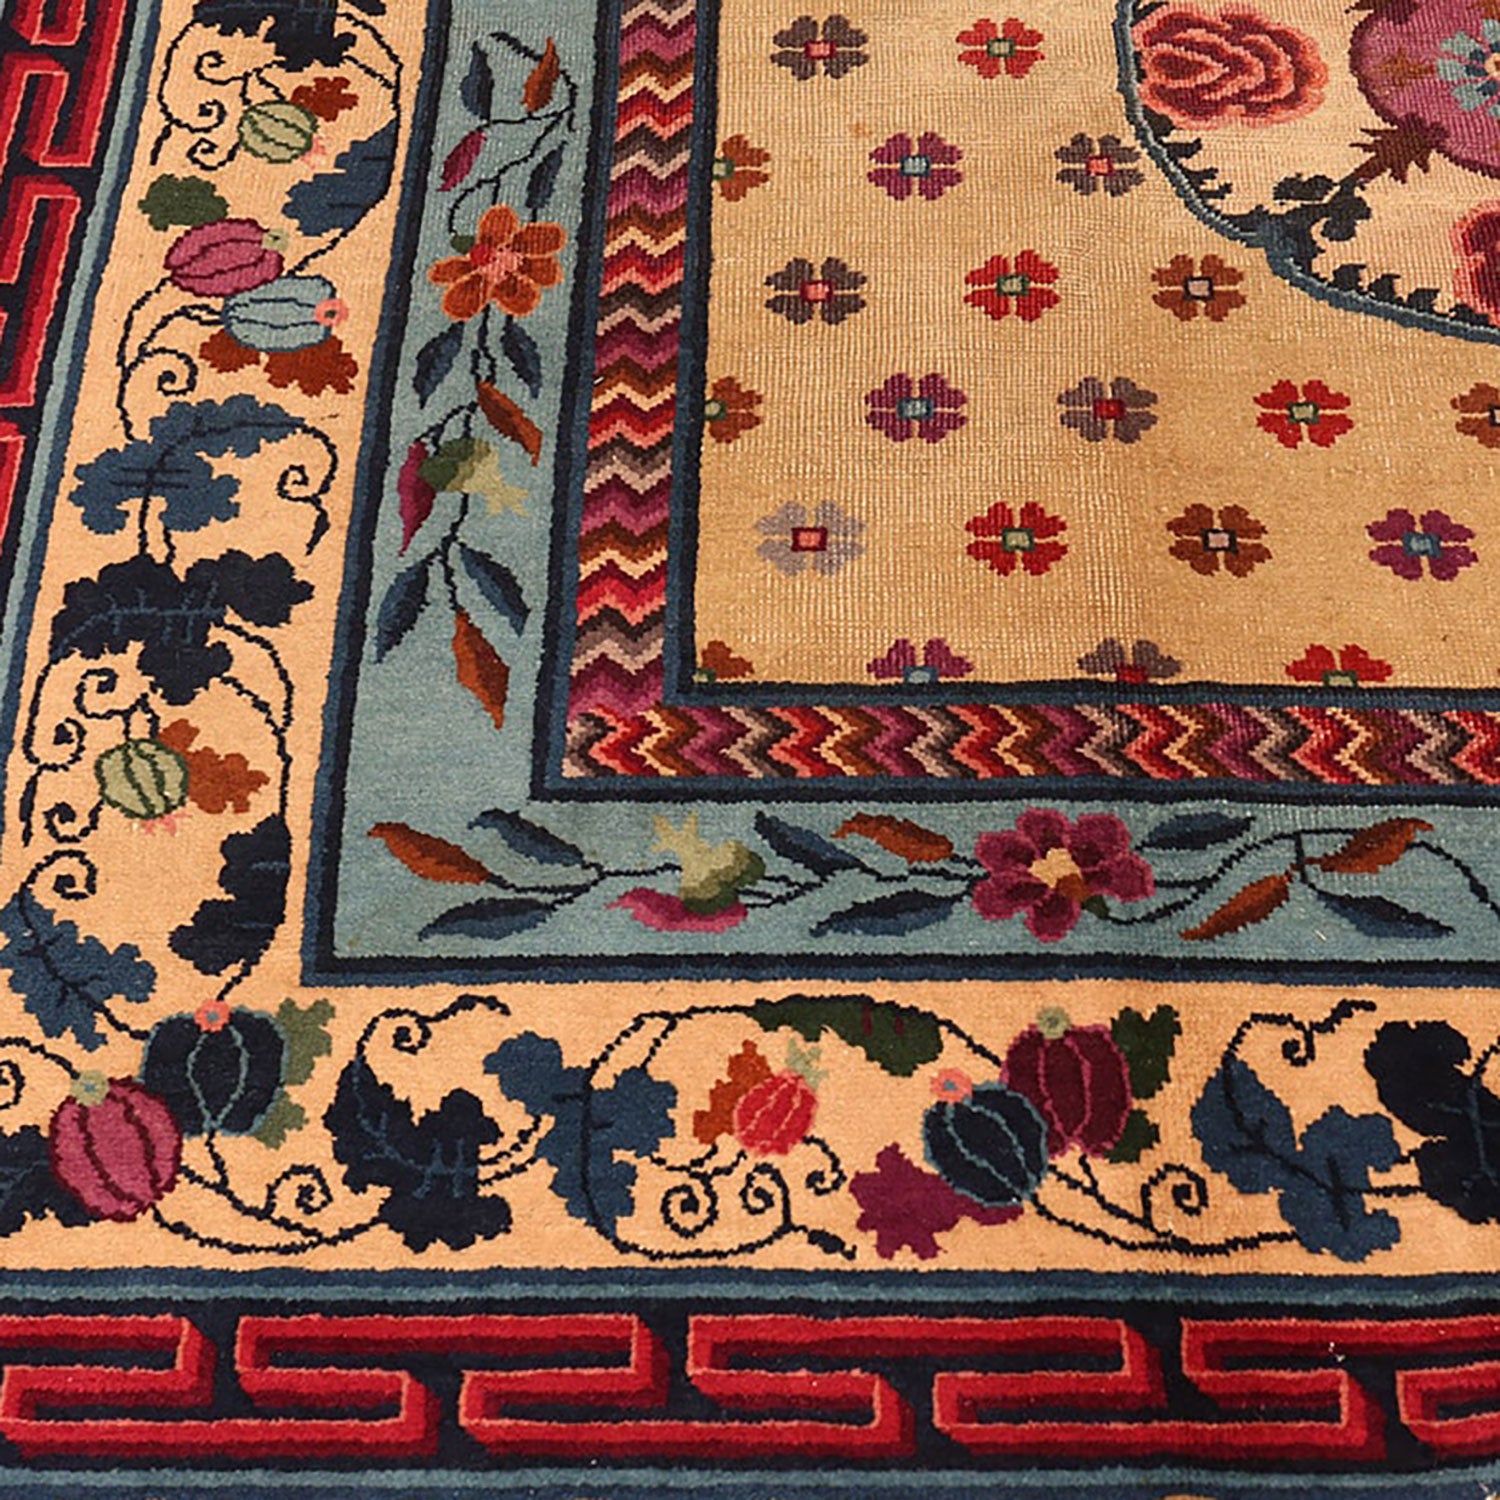 Intricately designed wool rug featuring vibrant colors and traditional craftsmanship.